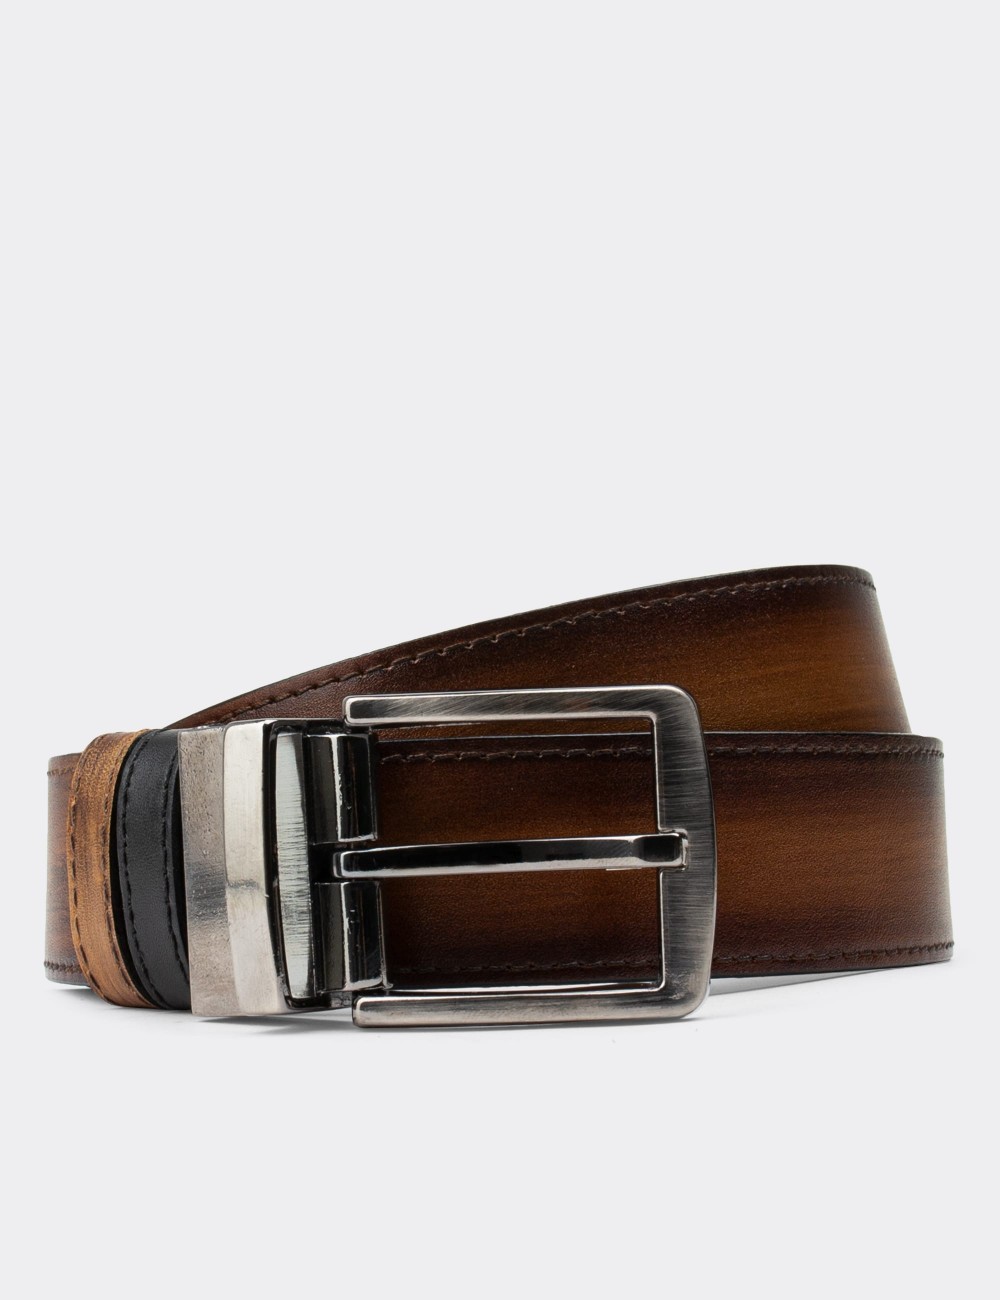  Leather Tan and Black Double Sided Men's Belt - K0409MSRIW01